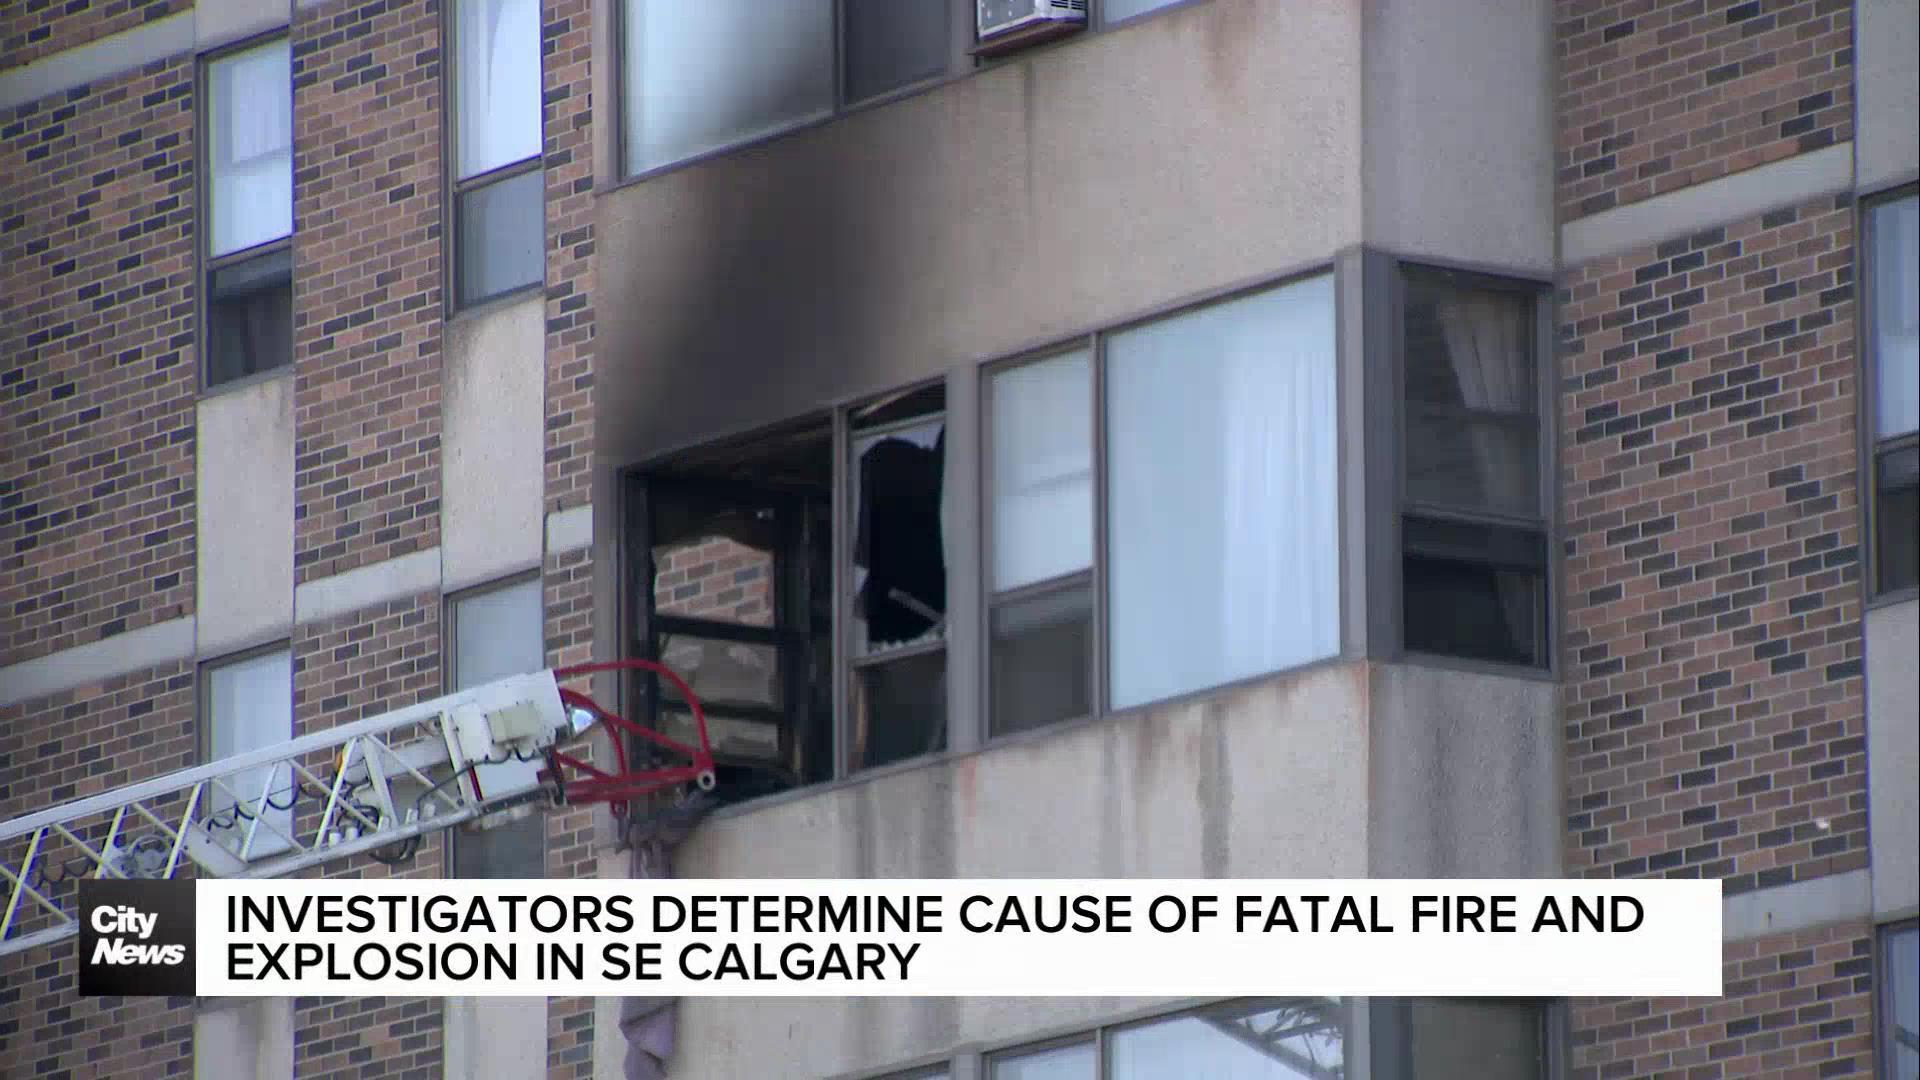 Officials determine cause of fatal explosion at Calgary seniors home